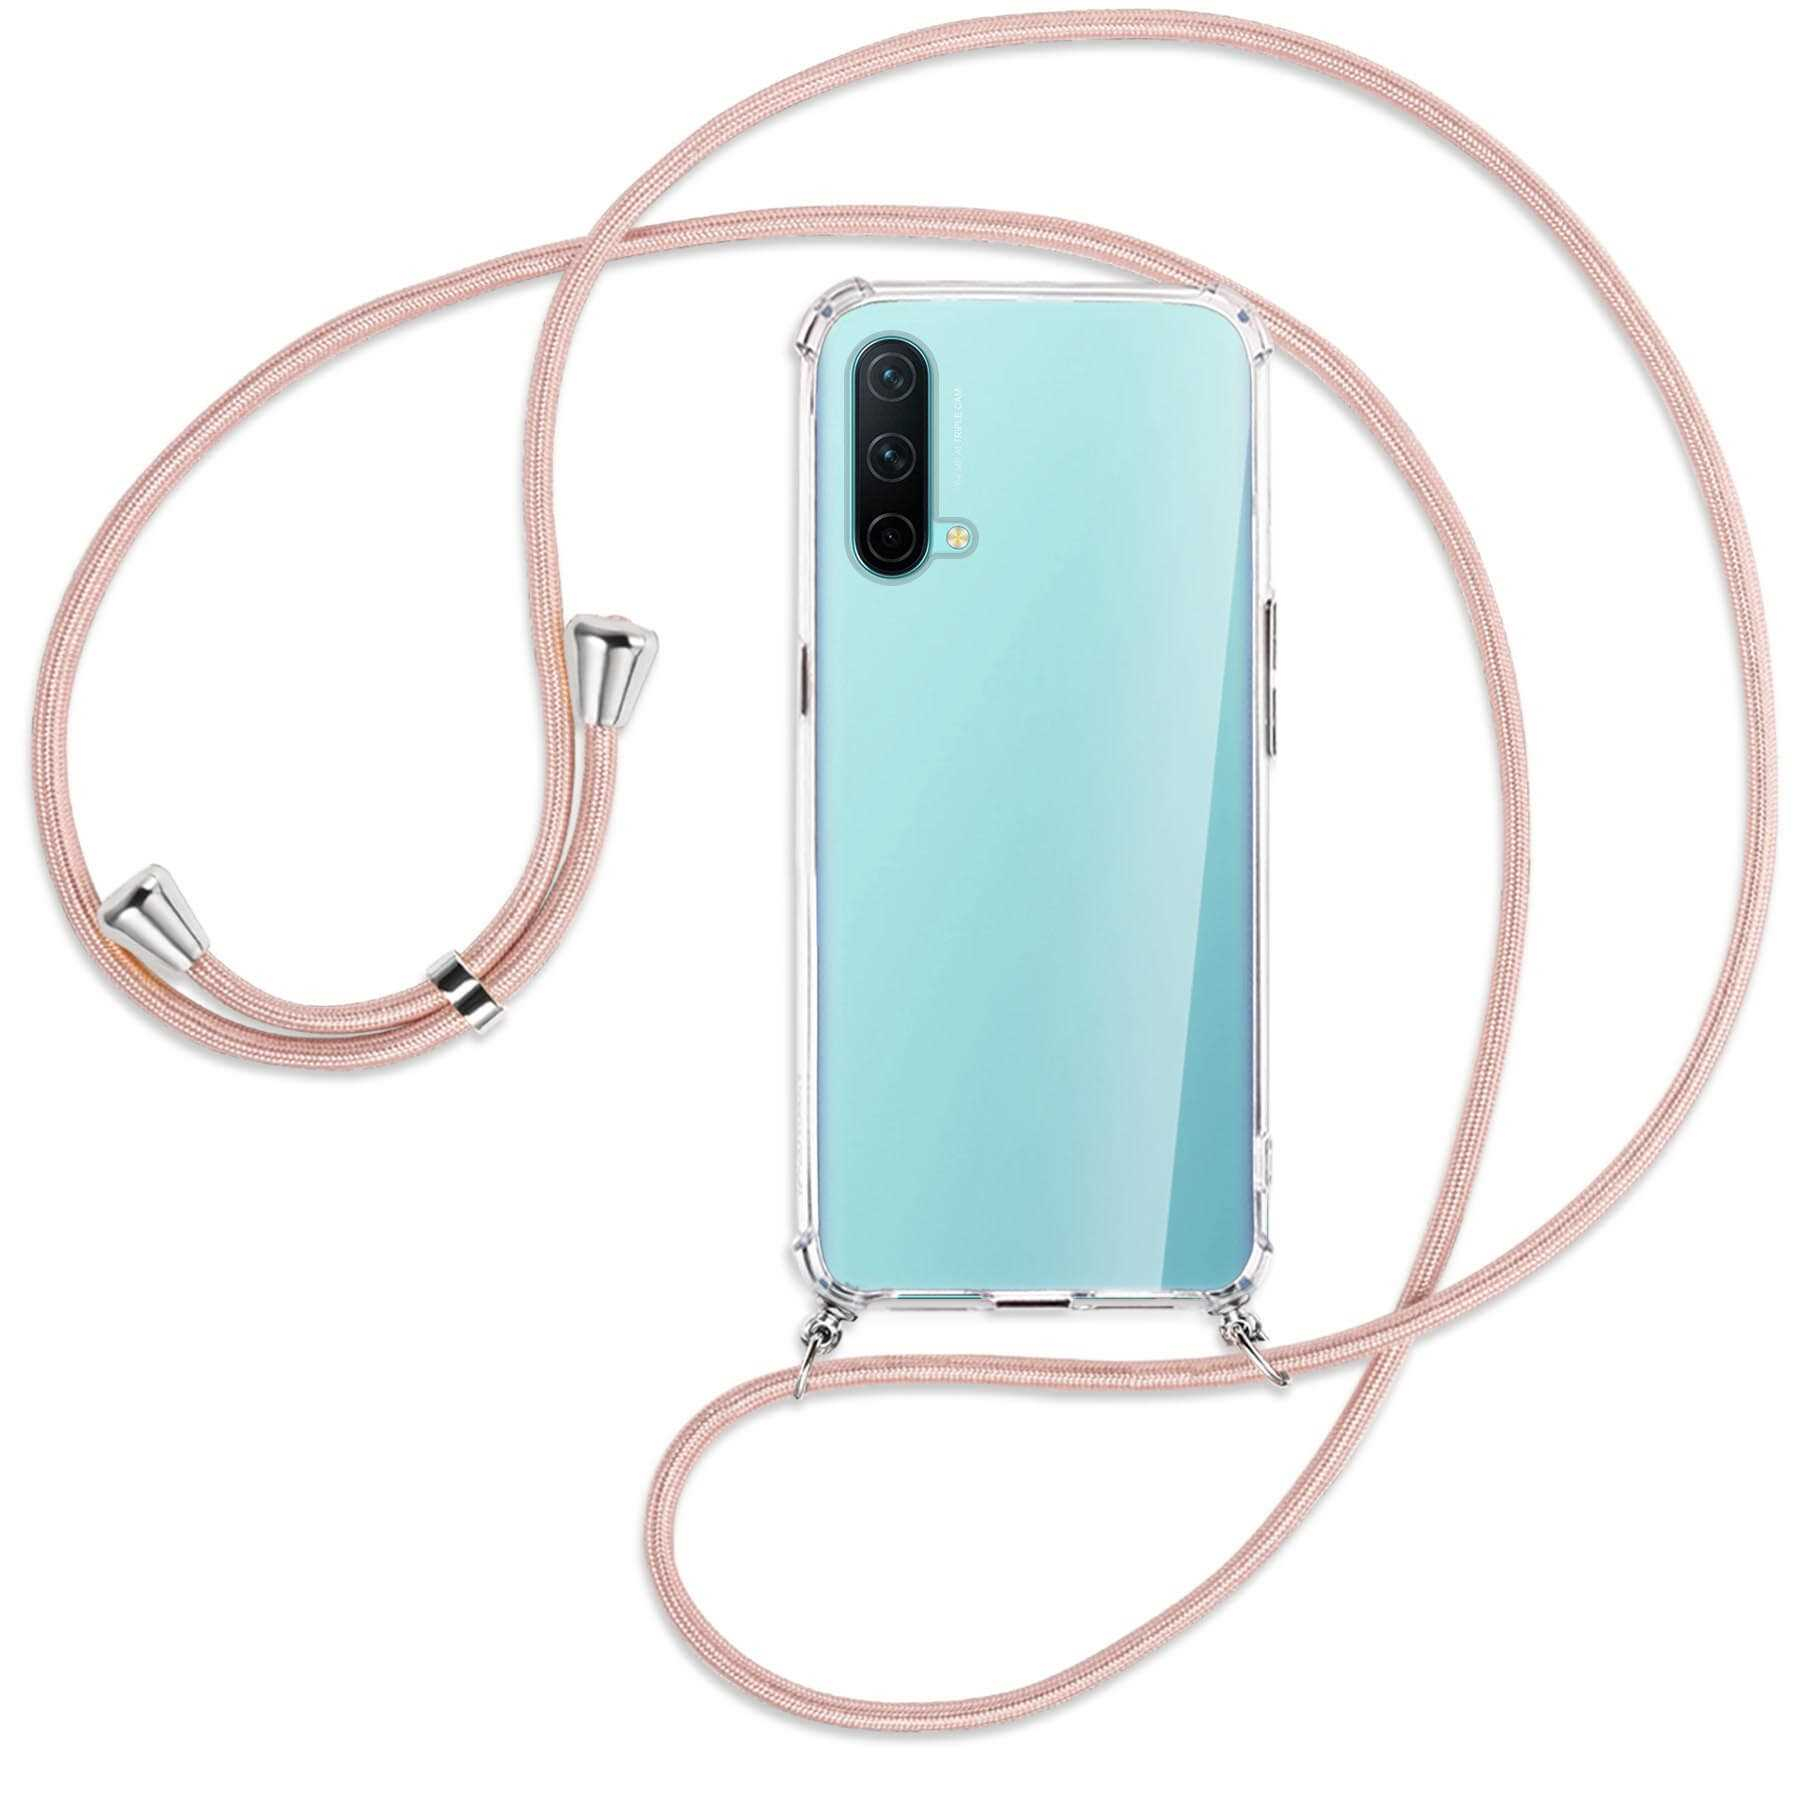 Edition 5G, Core Nord Silber Backcover, CE ENERGY / mit MORE MTB Kordel, Umhänge-Hülle OnePlus, Rosegold